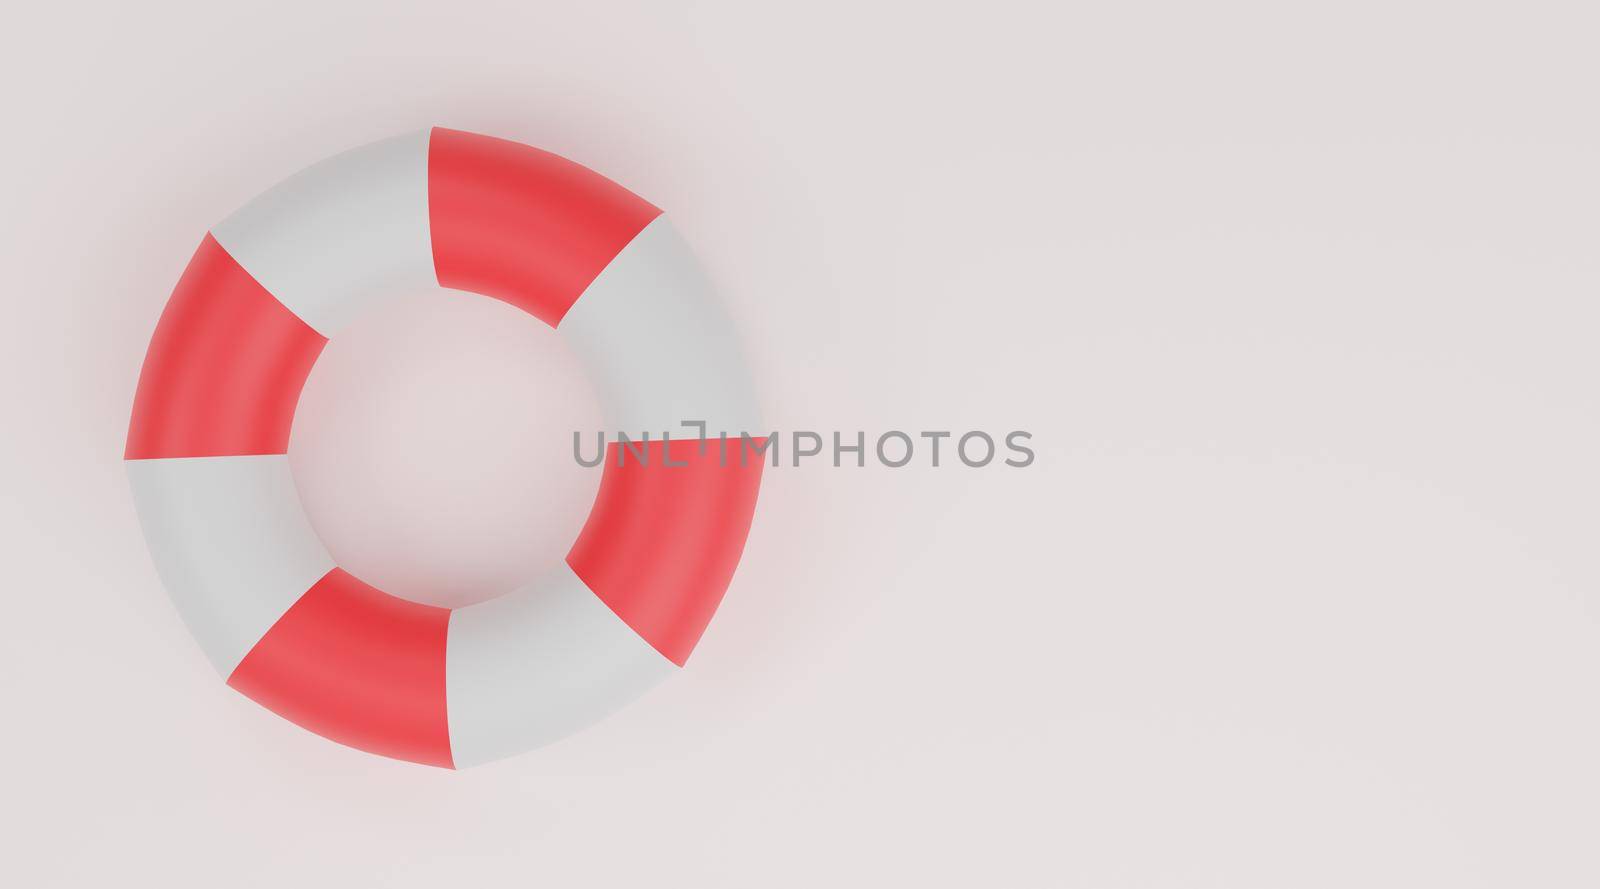 Swimming ring, Life buoy red and white on white background by sirawit99